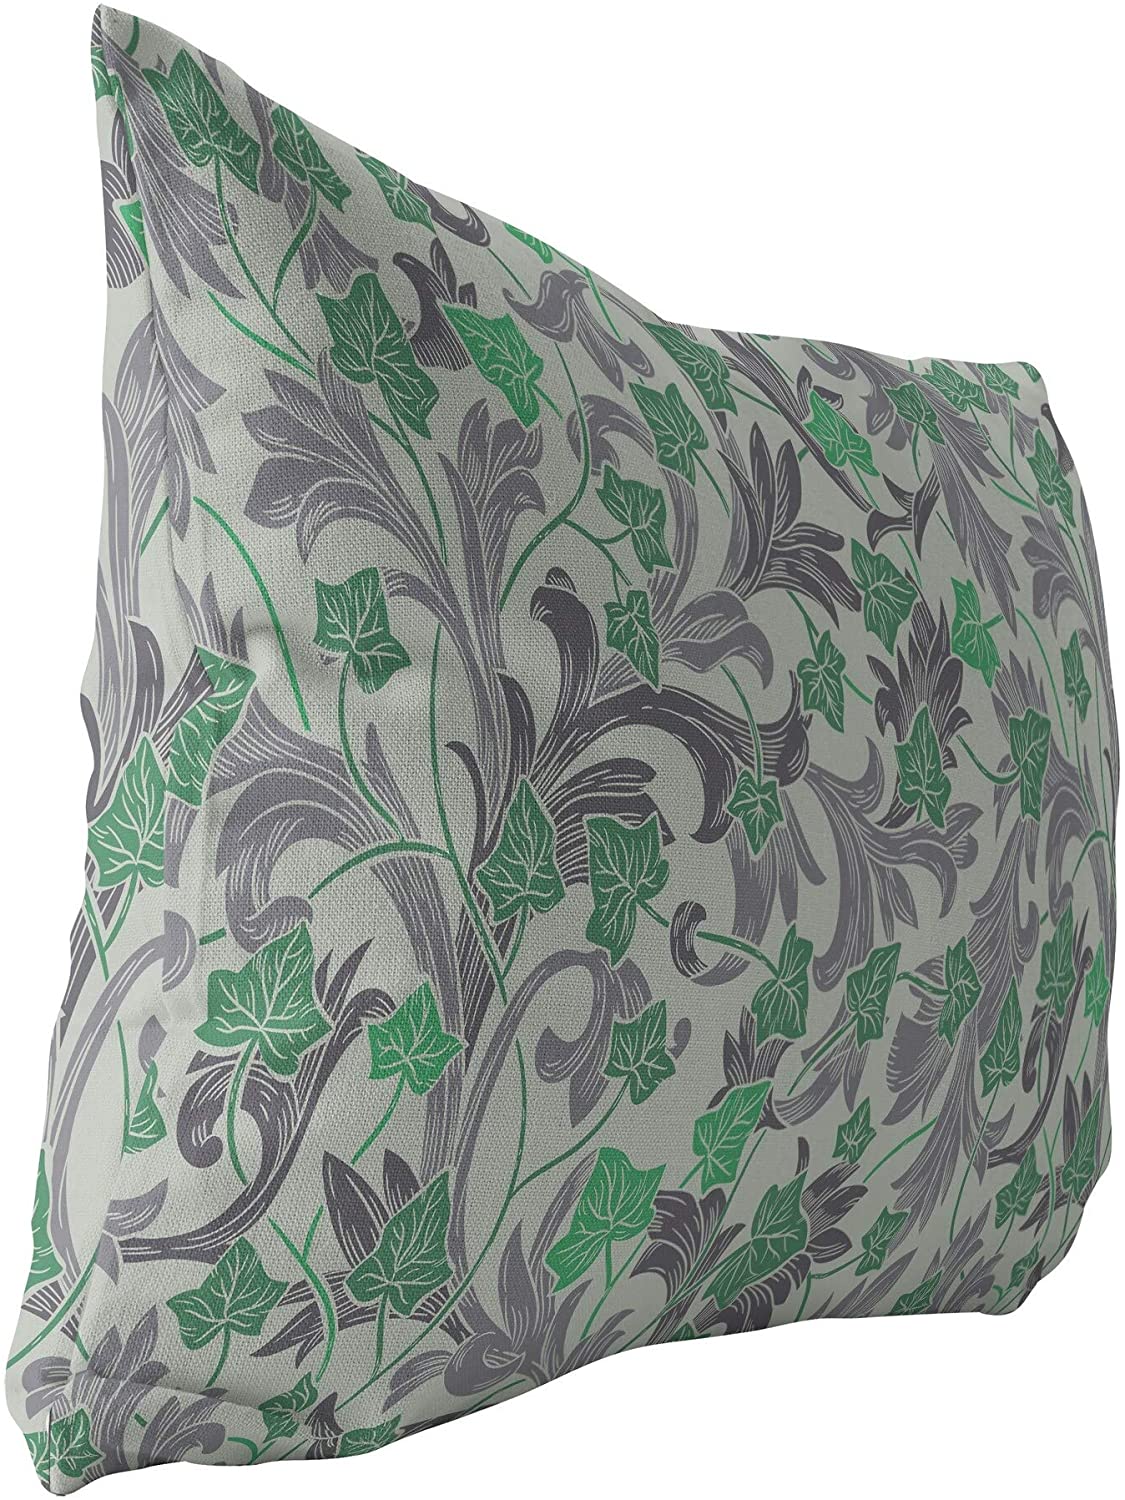 Thorn Light Indoor|Outdoor Lumbar Pillow 20x14 Green Floral Modern Contemporary Polyester Removable Cover